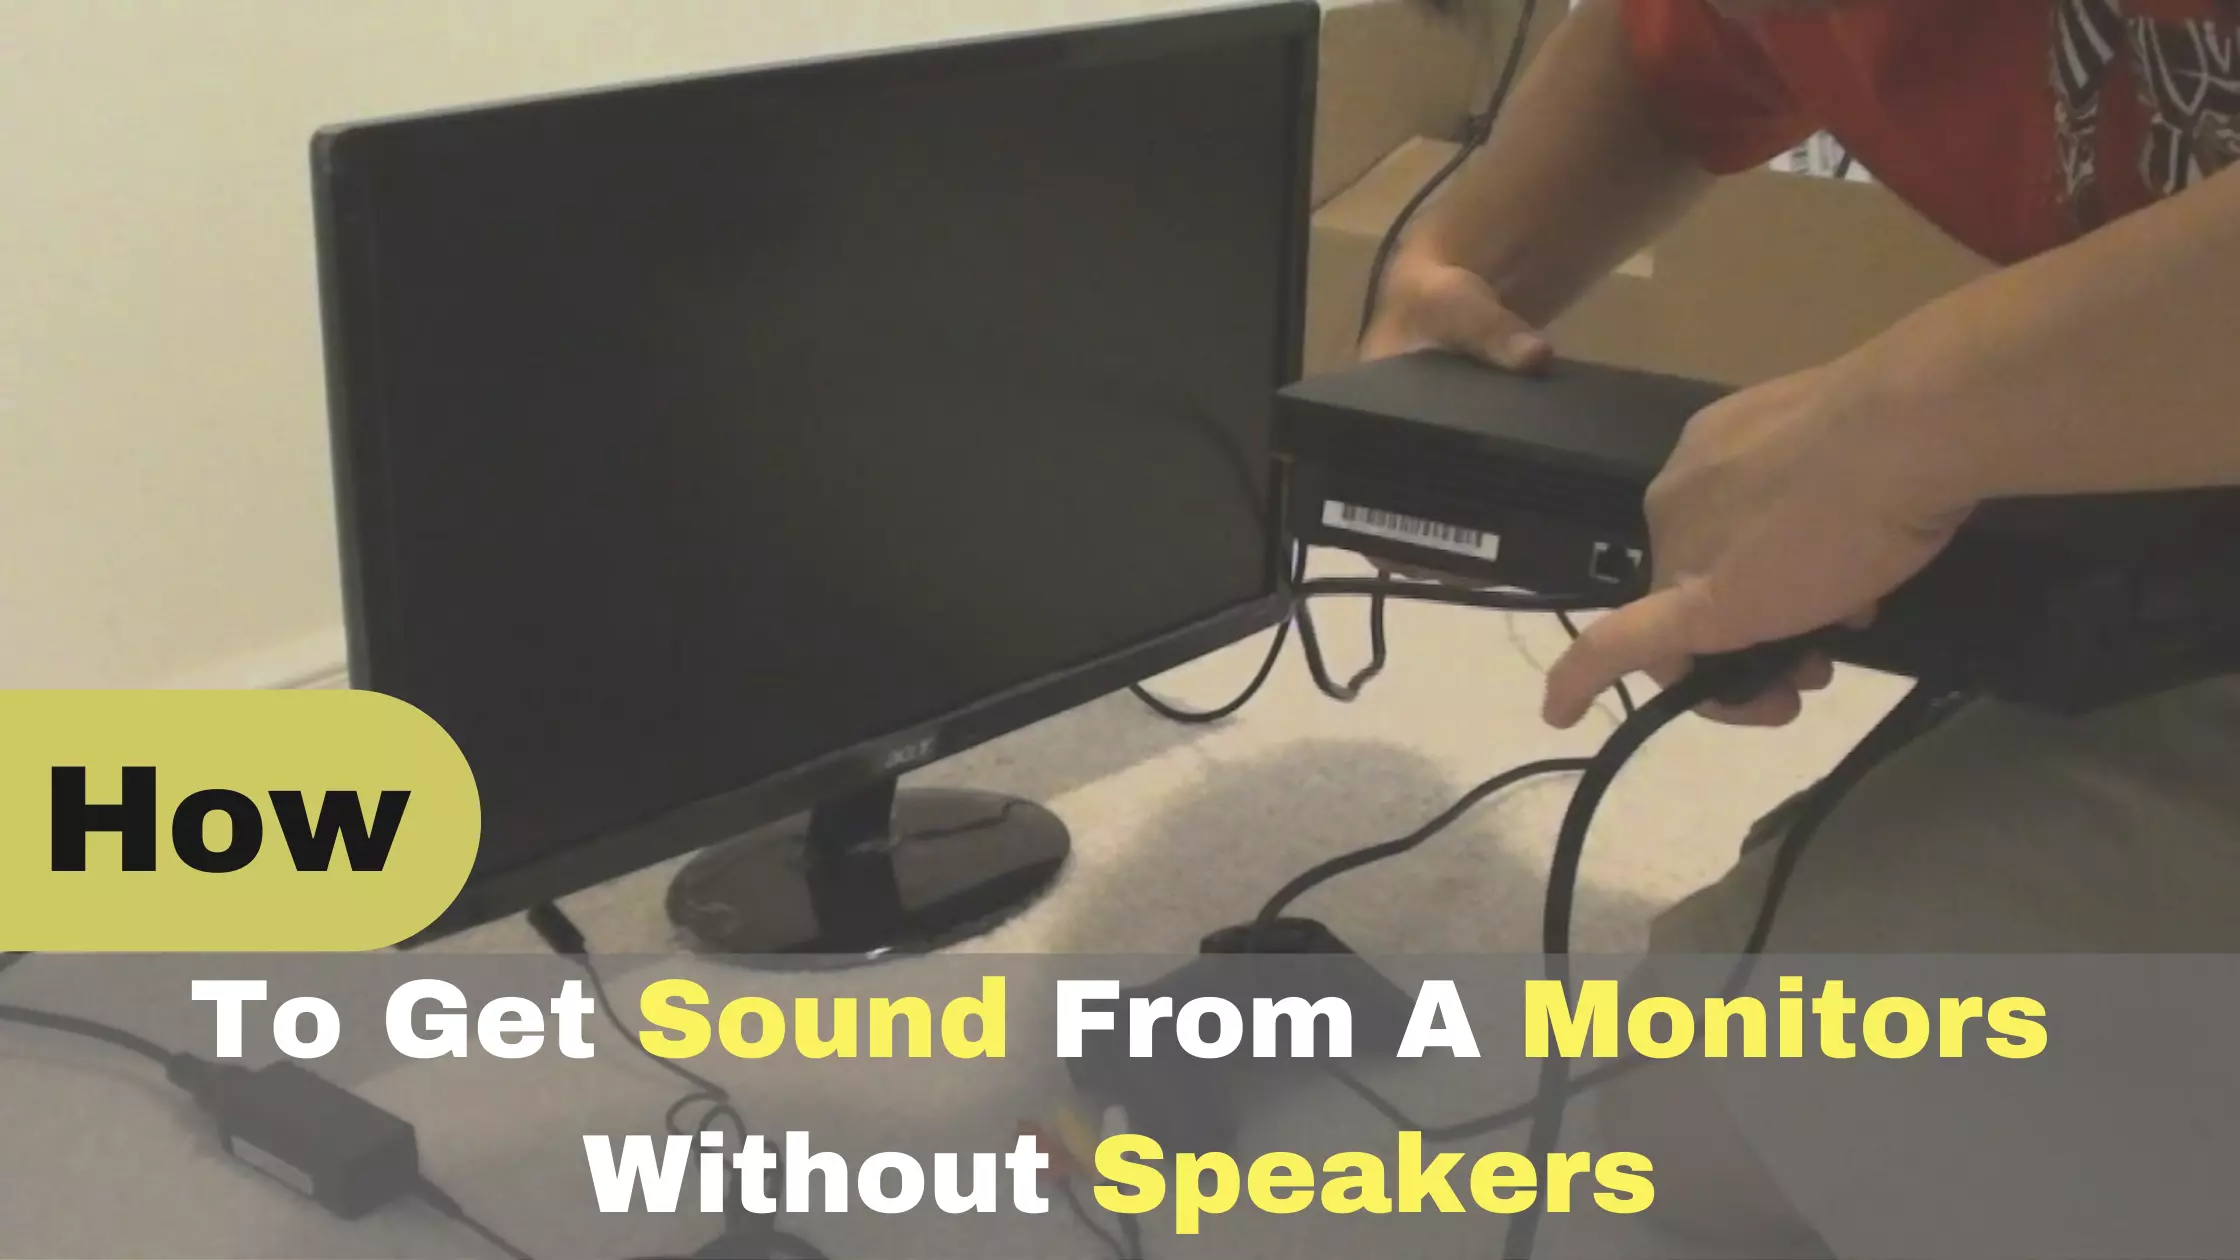 How To Get Sound From A Monitor Without Speakers: Complete Guide